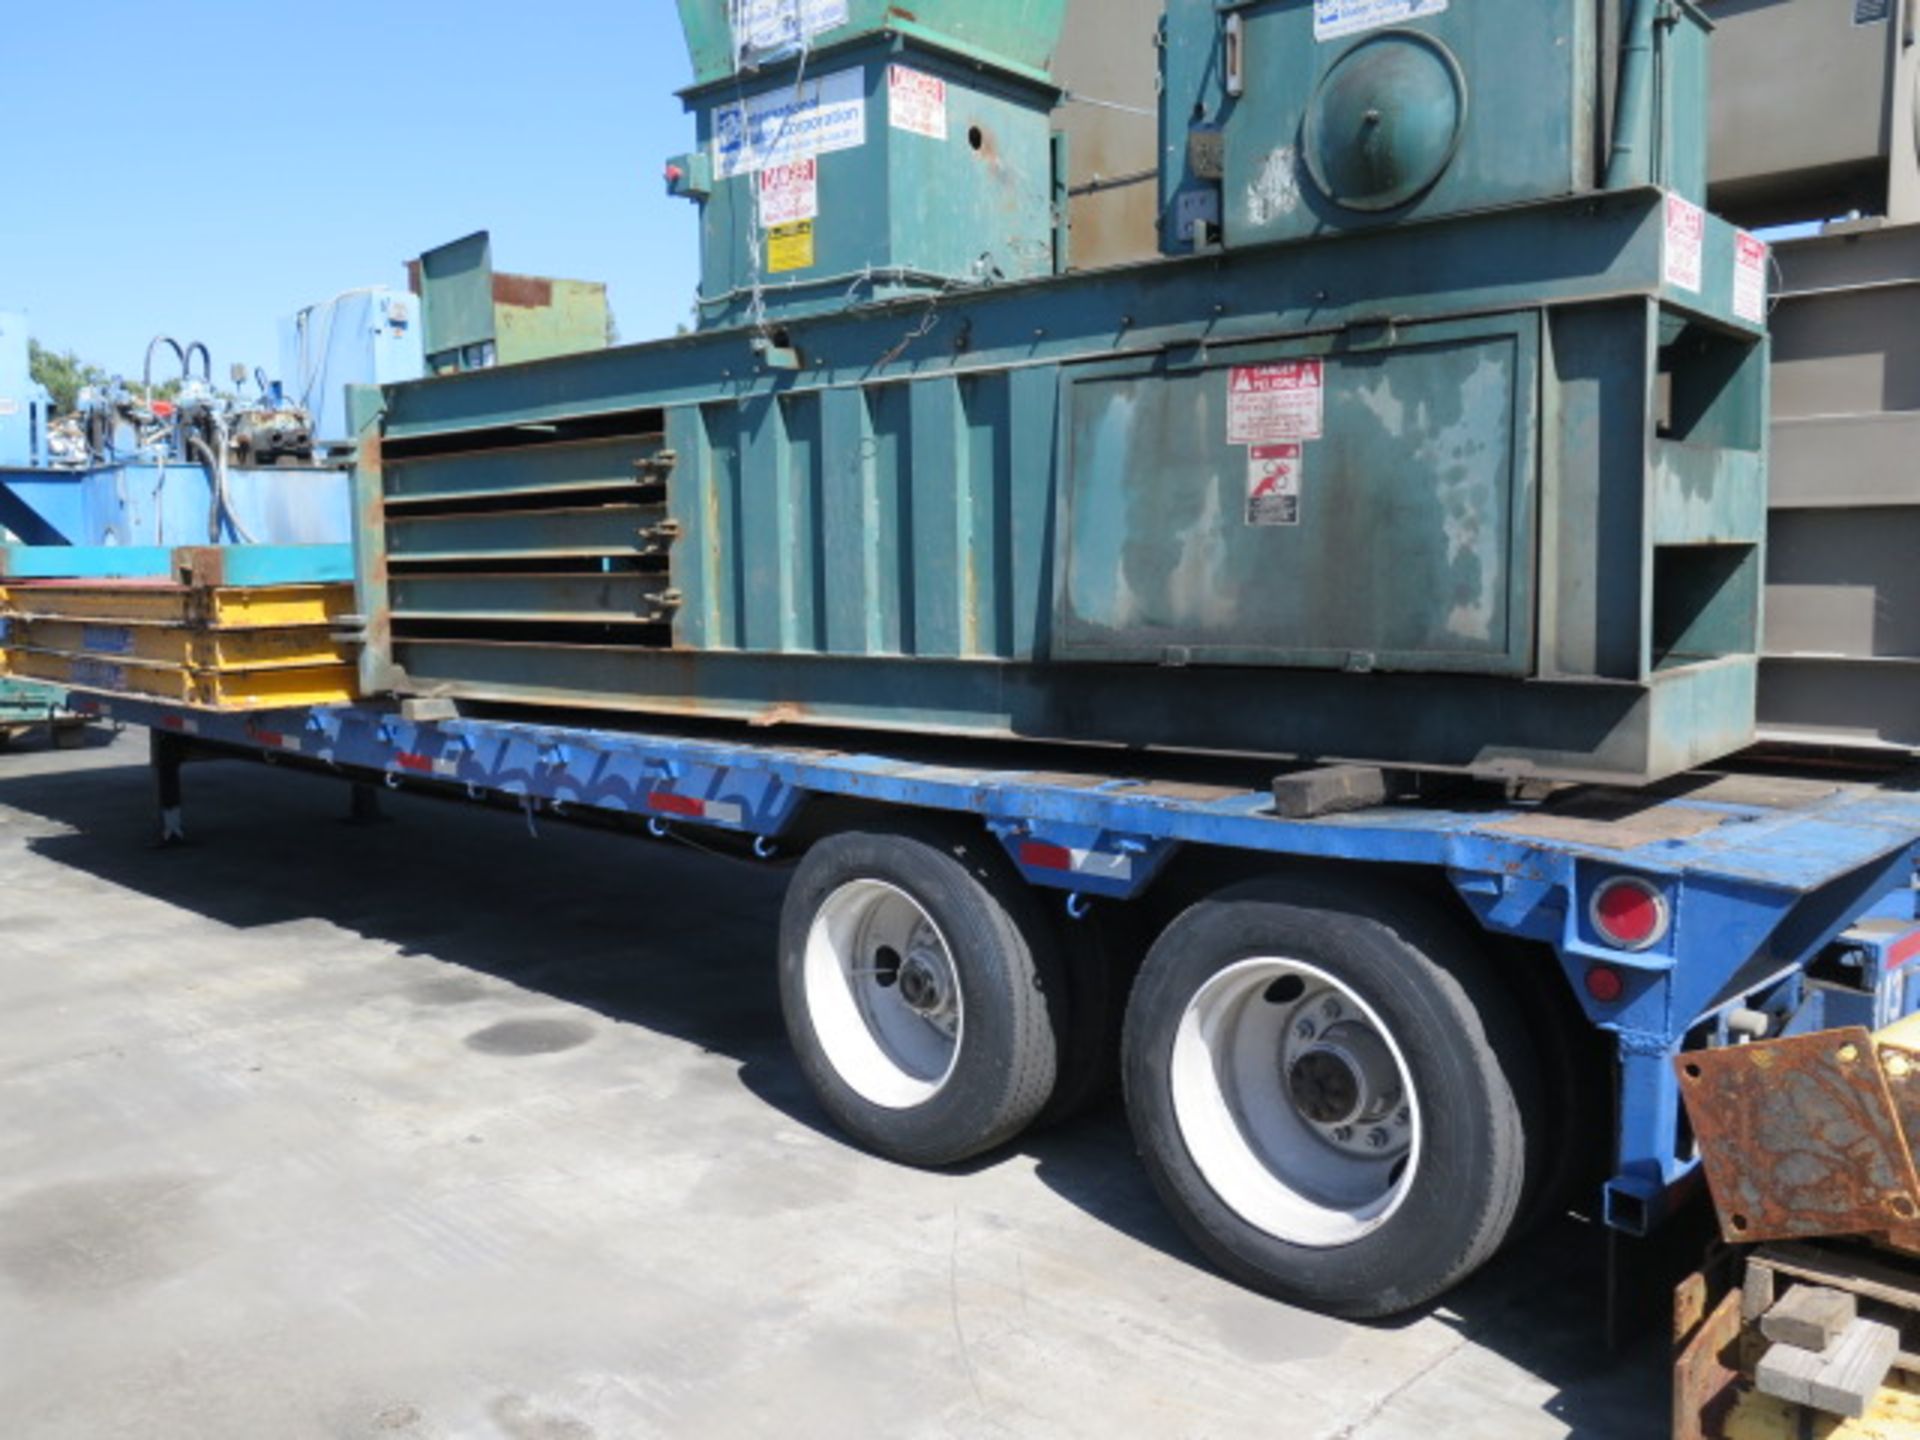 Drop-Deck Trailer Lisc 4KU8502 (SOLD AS-IS - NO WARRANTY) - Image 7 of 16